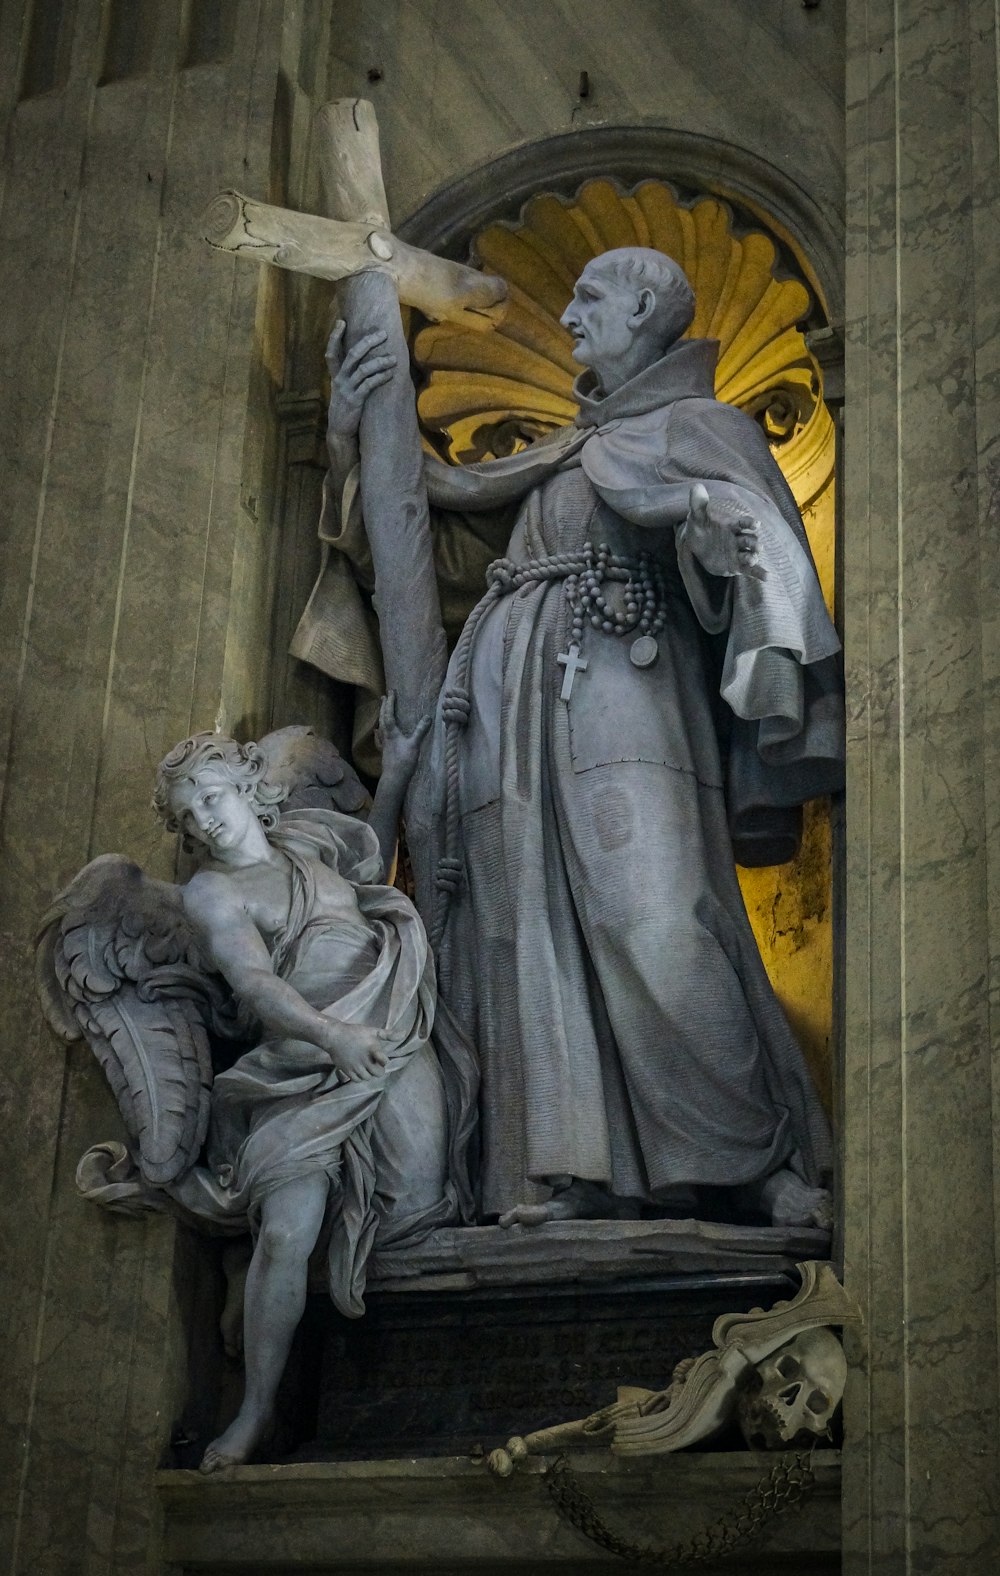 a statue of a man holding a cross next to a woman